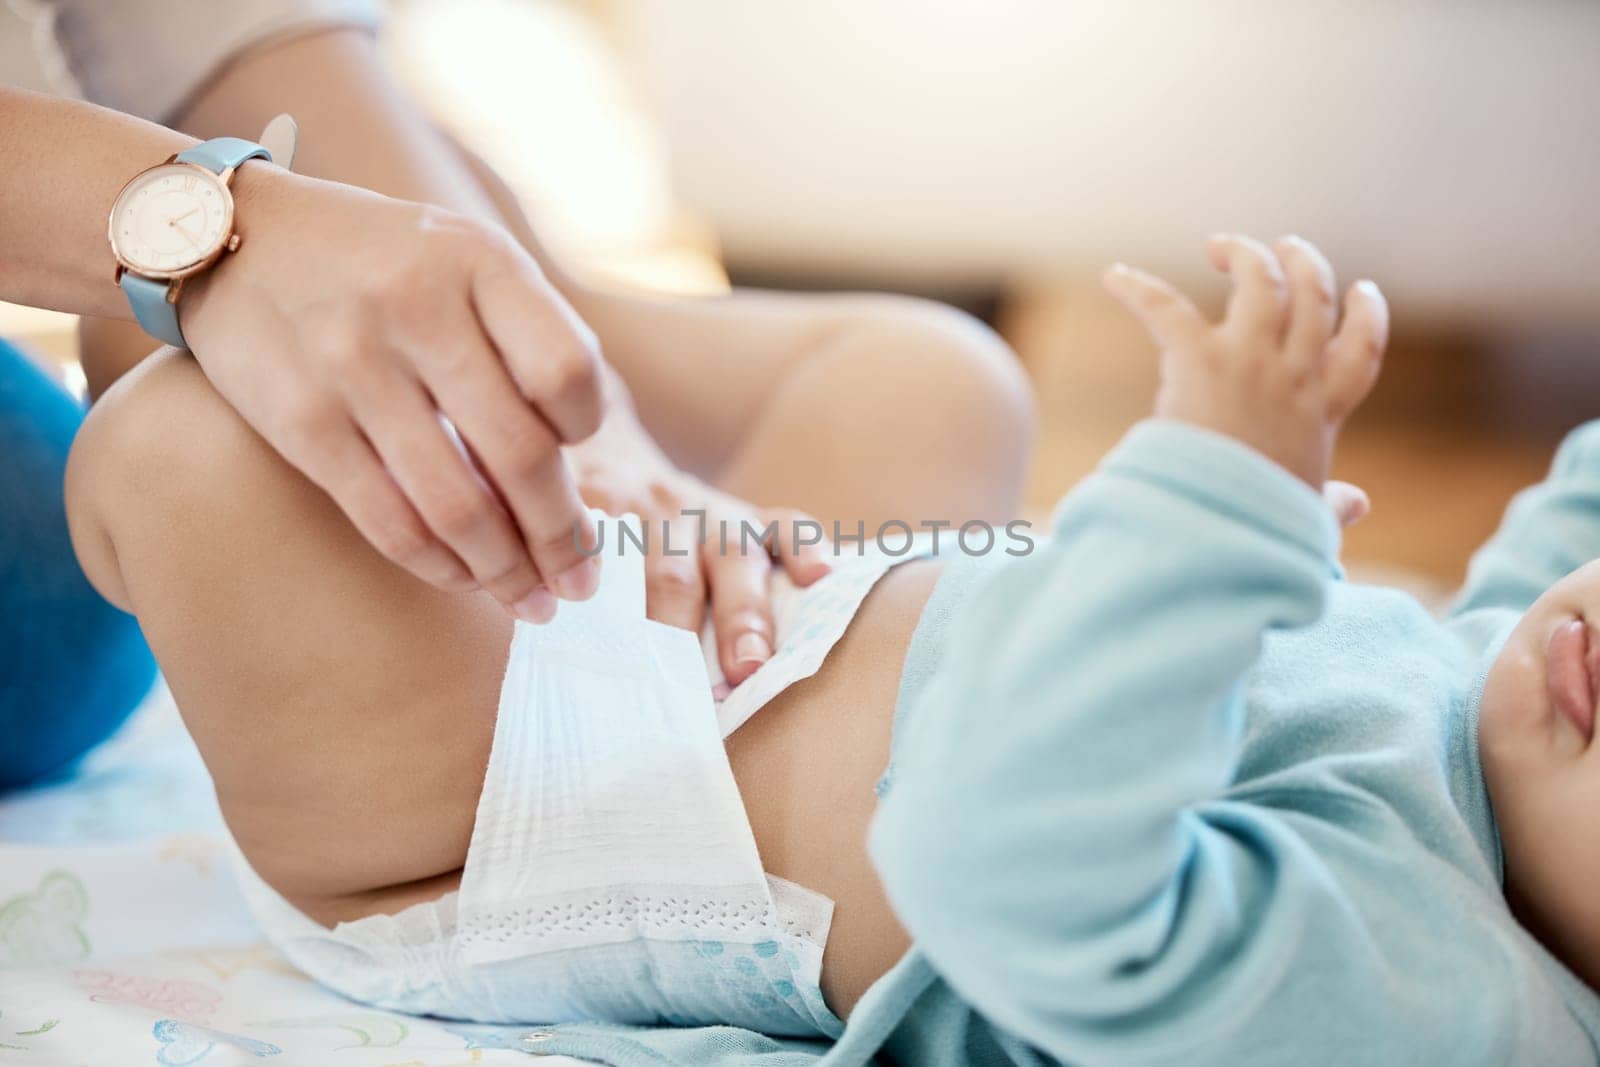 Diaper change, hands of mom and baby with calm cleaning time, bonding and parent with newborn getting dressed. Parenthood, child and mother changing nappy on bed with love, care and hygiene in home